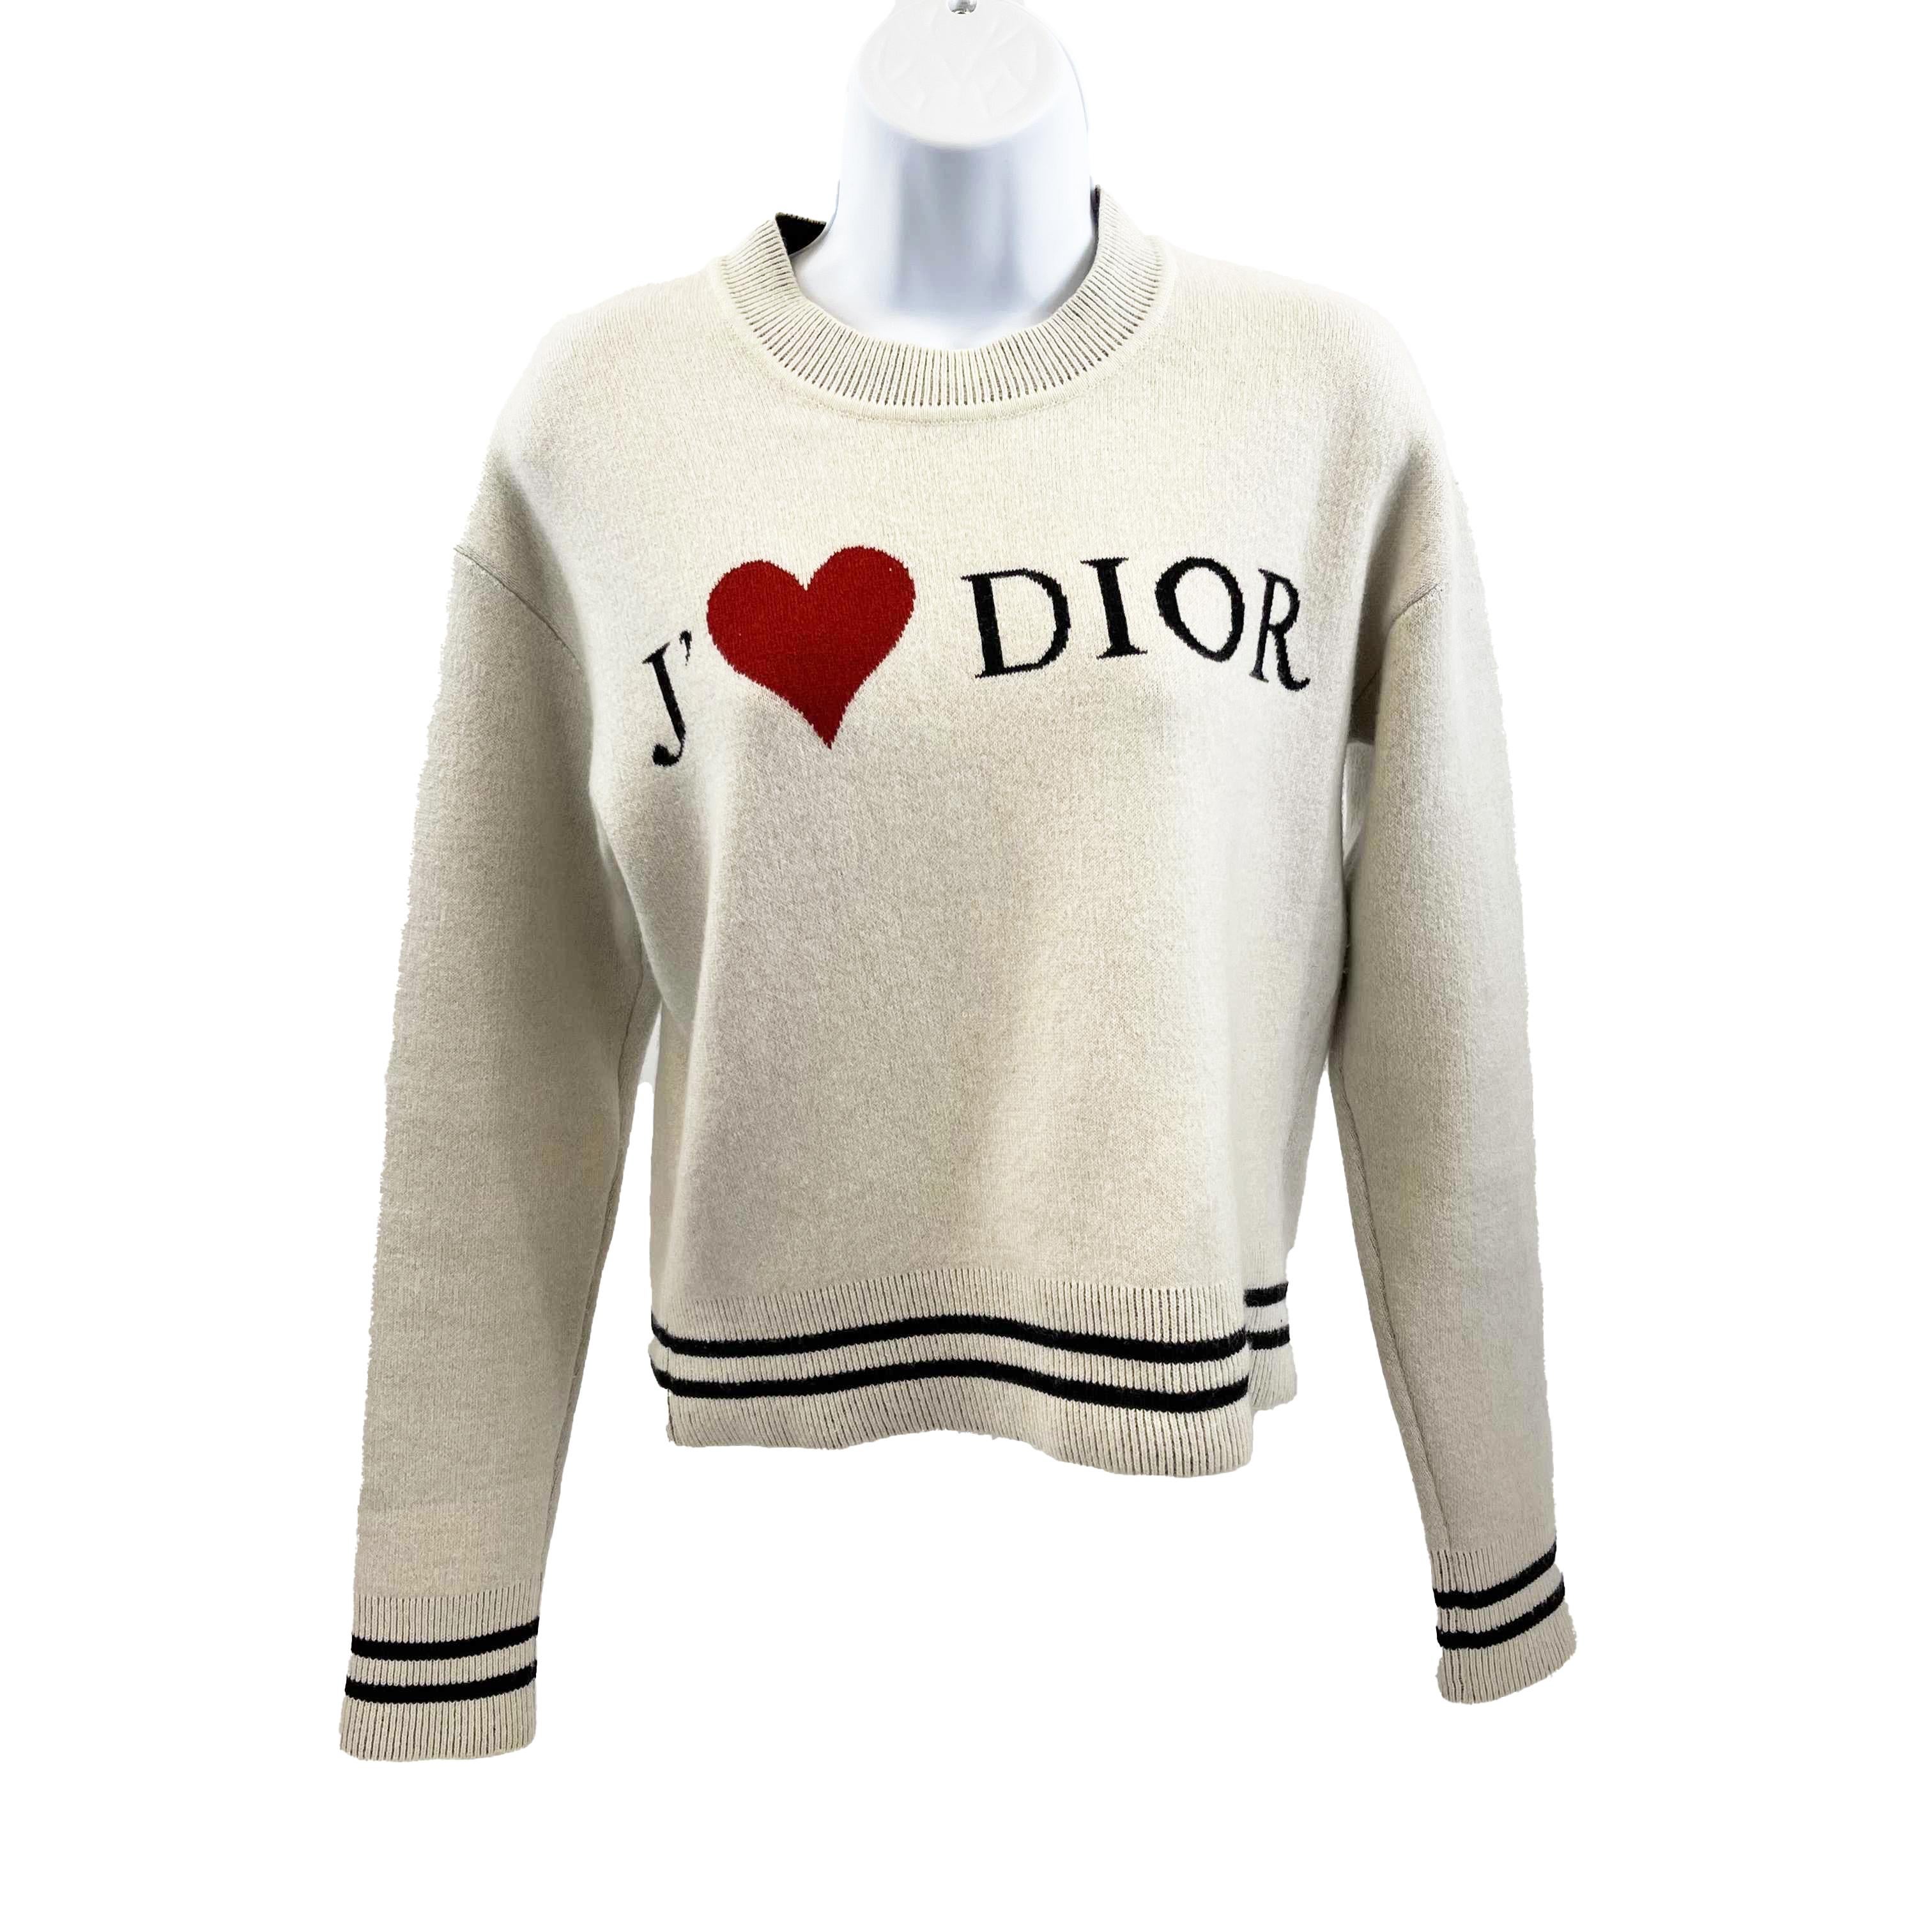 Christian Dior 2019 Dioramour Capsule Collection Sweater Ivory 34 US 2 3